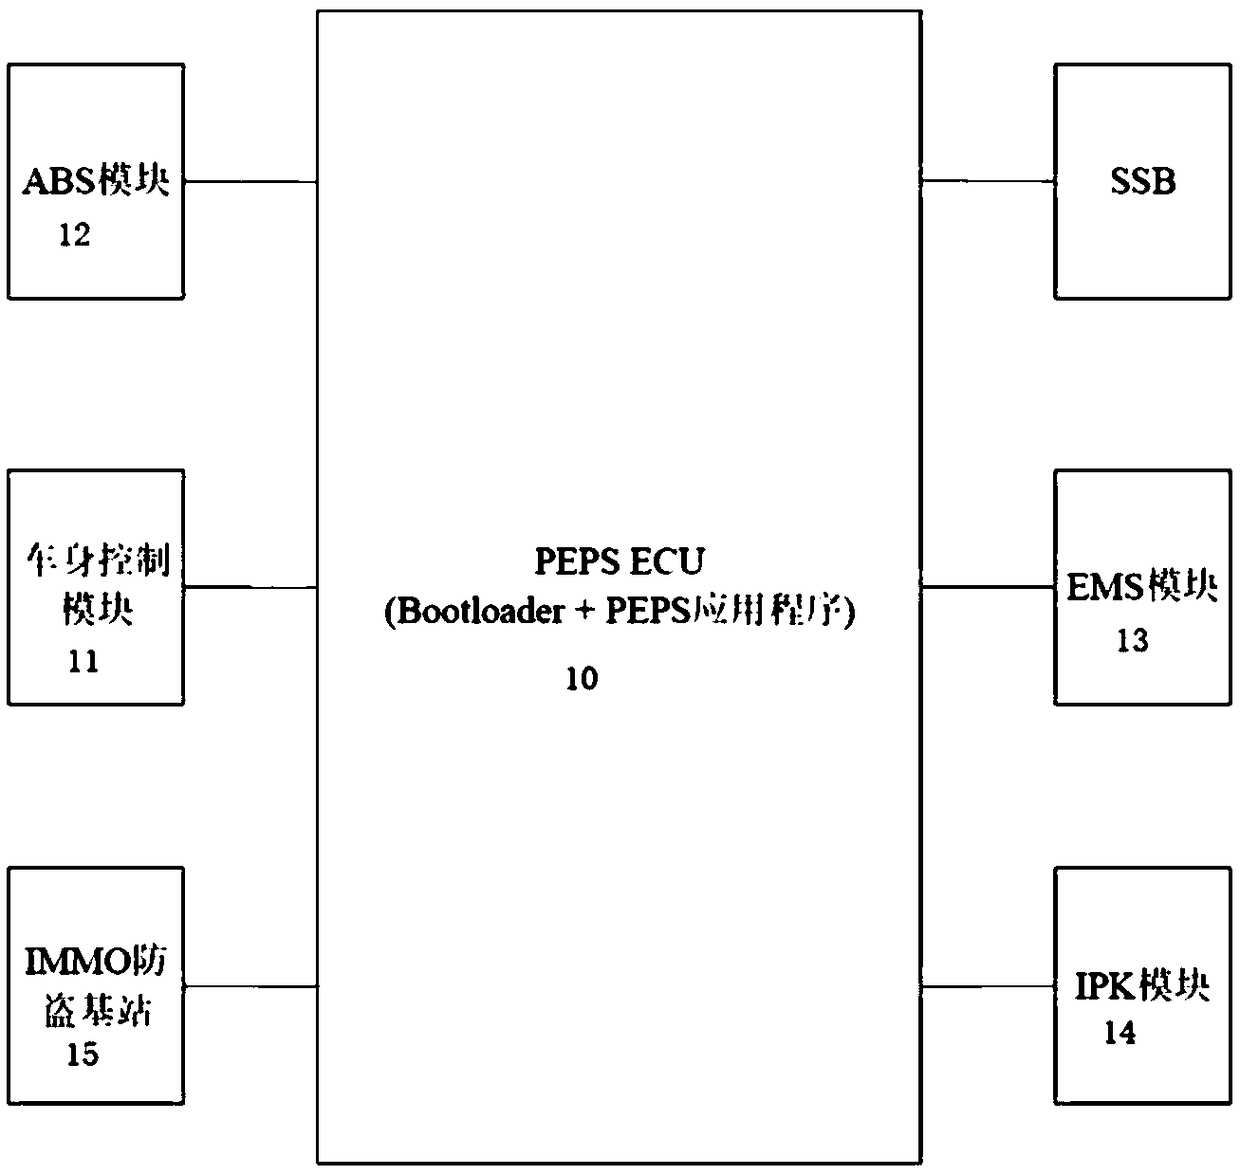 Bootloader architecture based on PEPS system and writing method